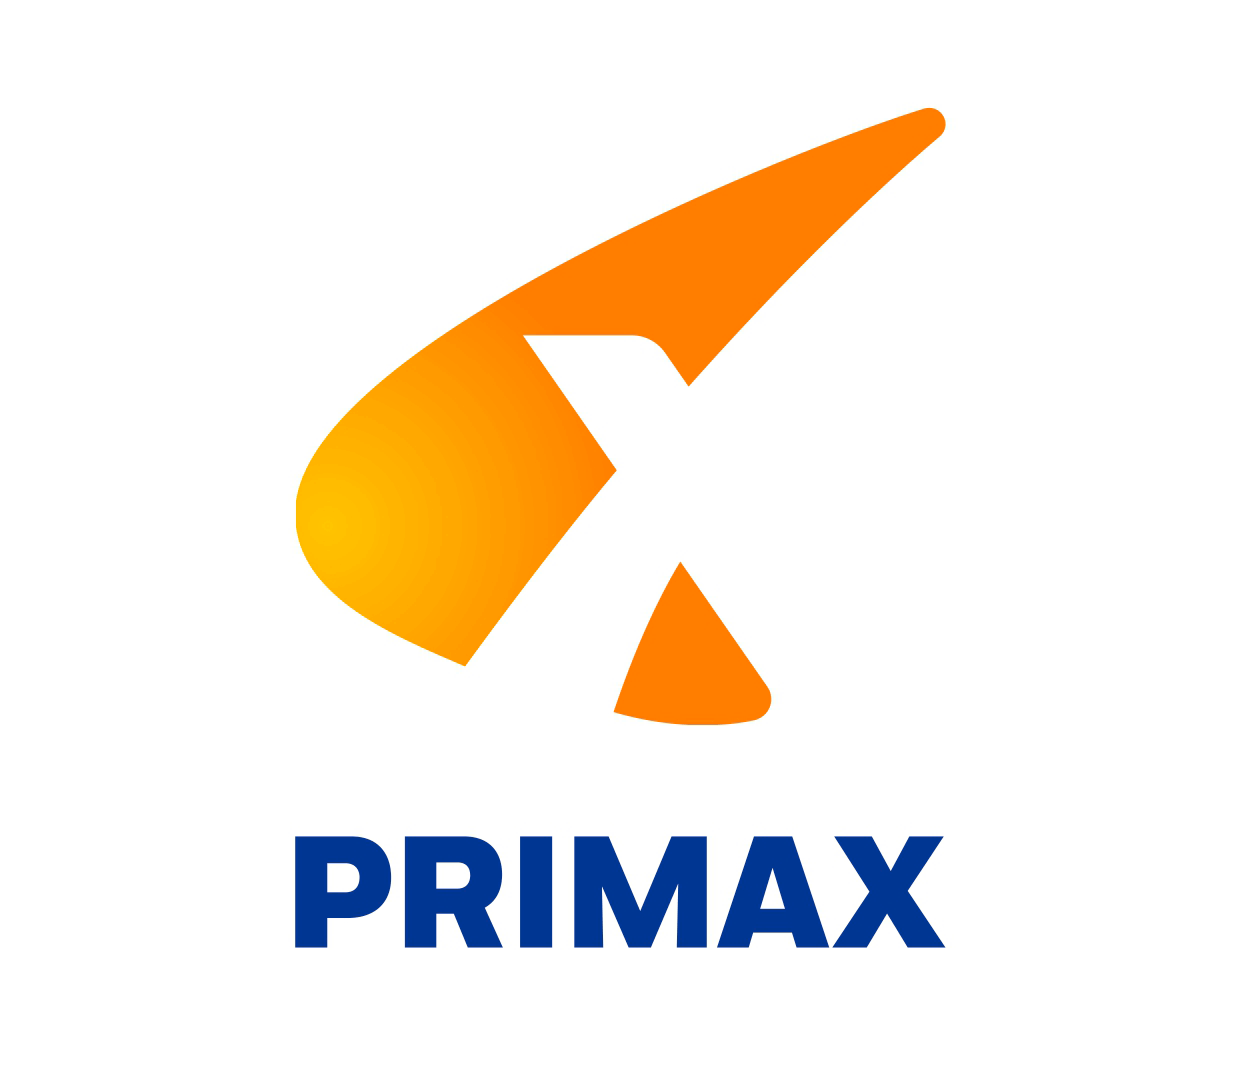 Primax Colombia S.A.